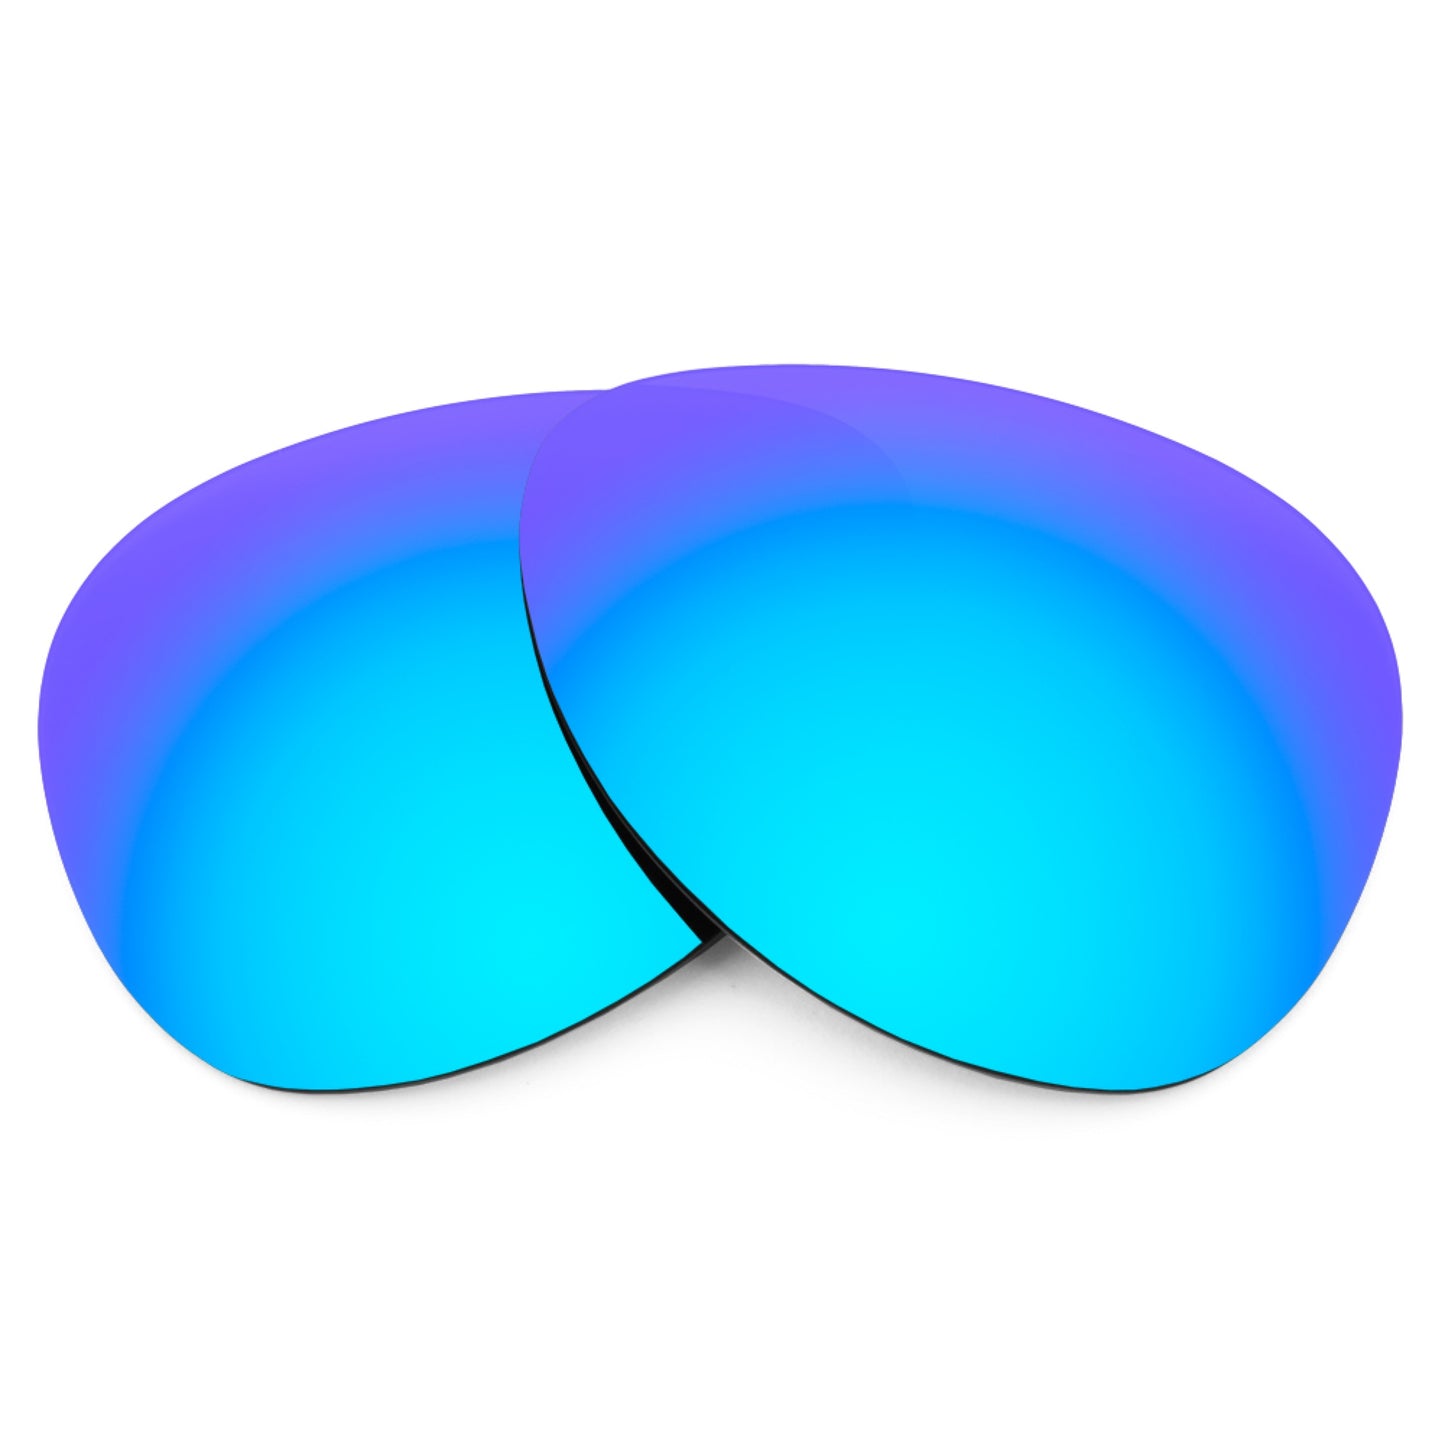 Revant replacement lenses for Ray-Ban Gatsby II RB4257 50mm Non-Polarized Ice Blue